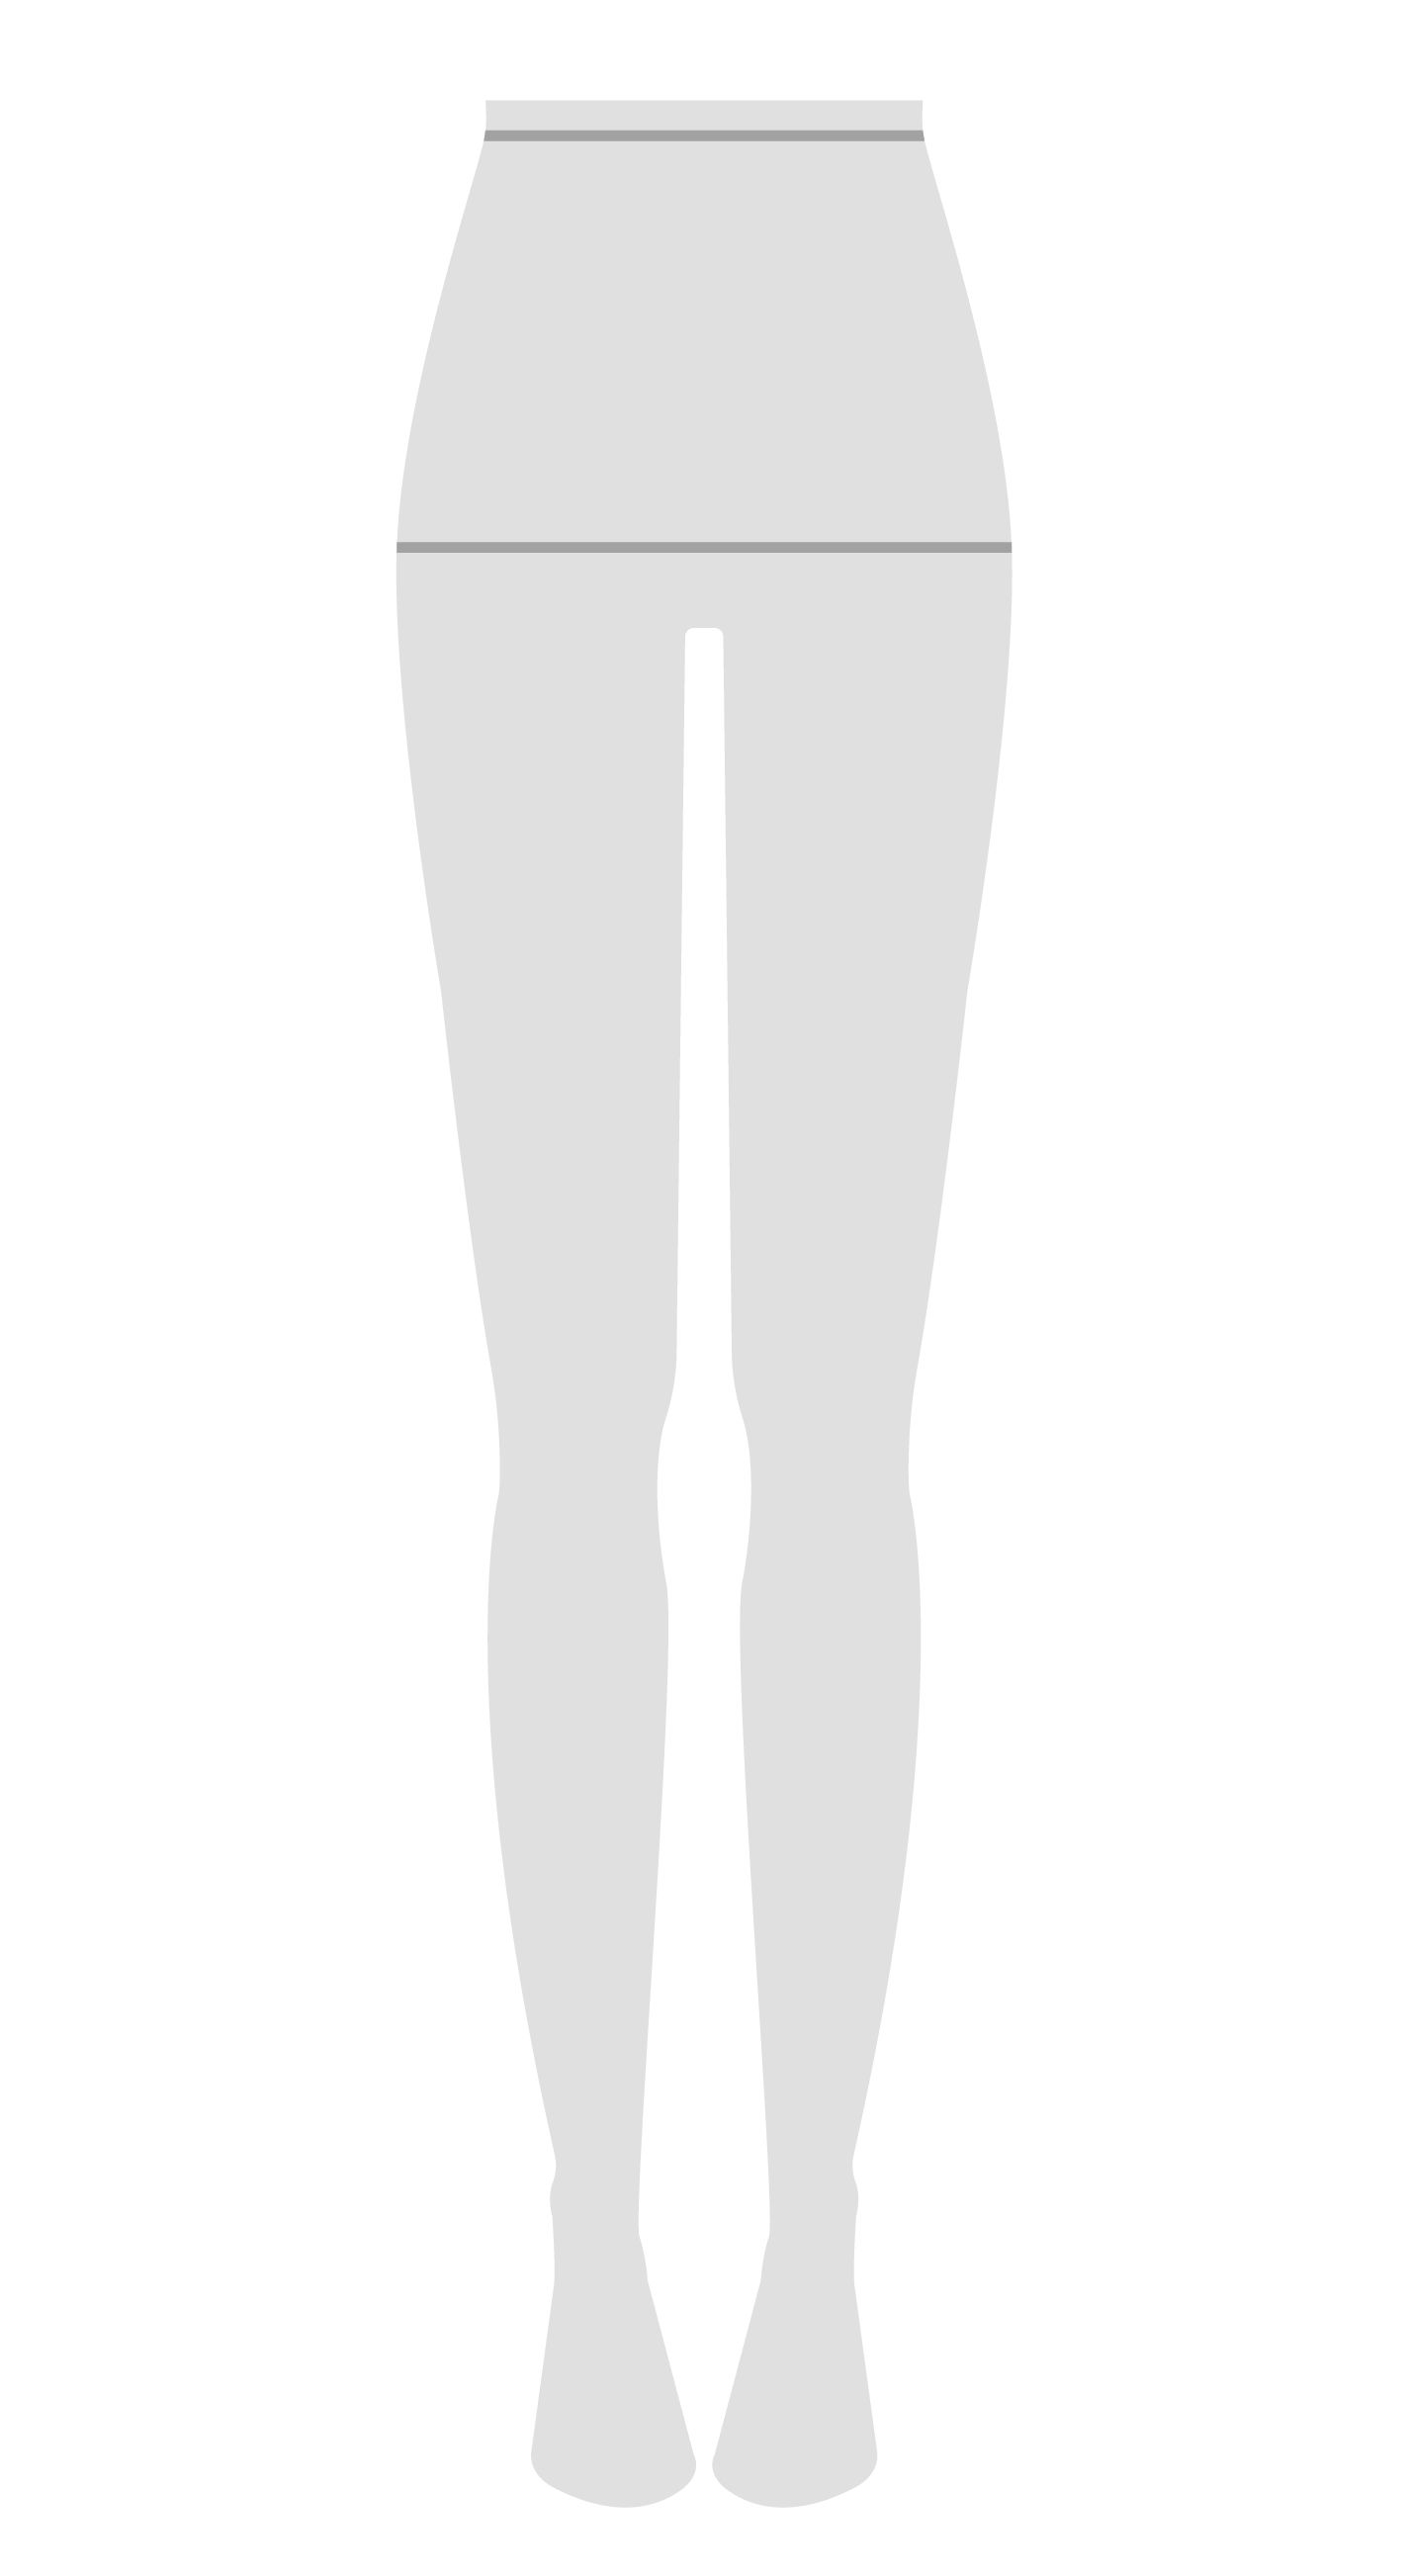 A silhouette of a mannequin with lines on the waist and hips indicating where to measure.